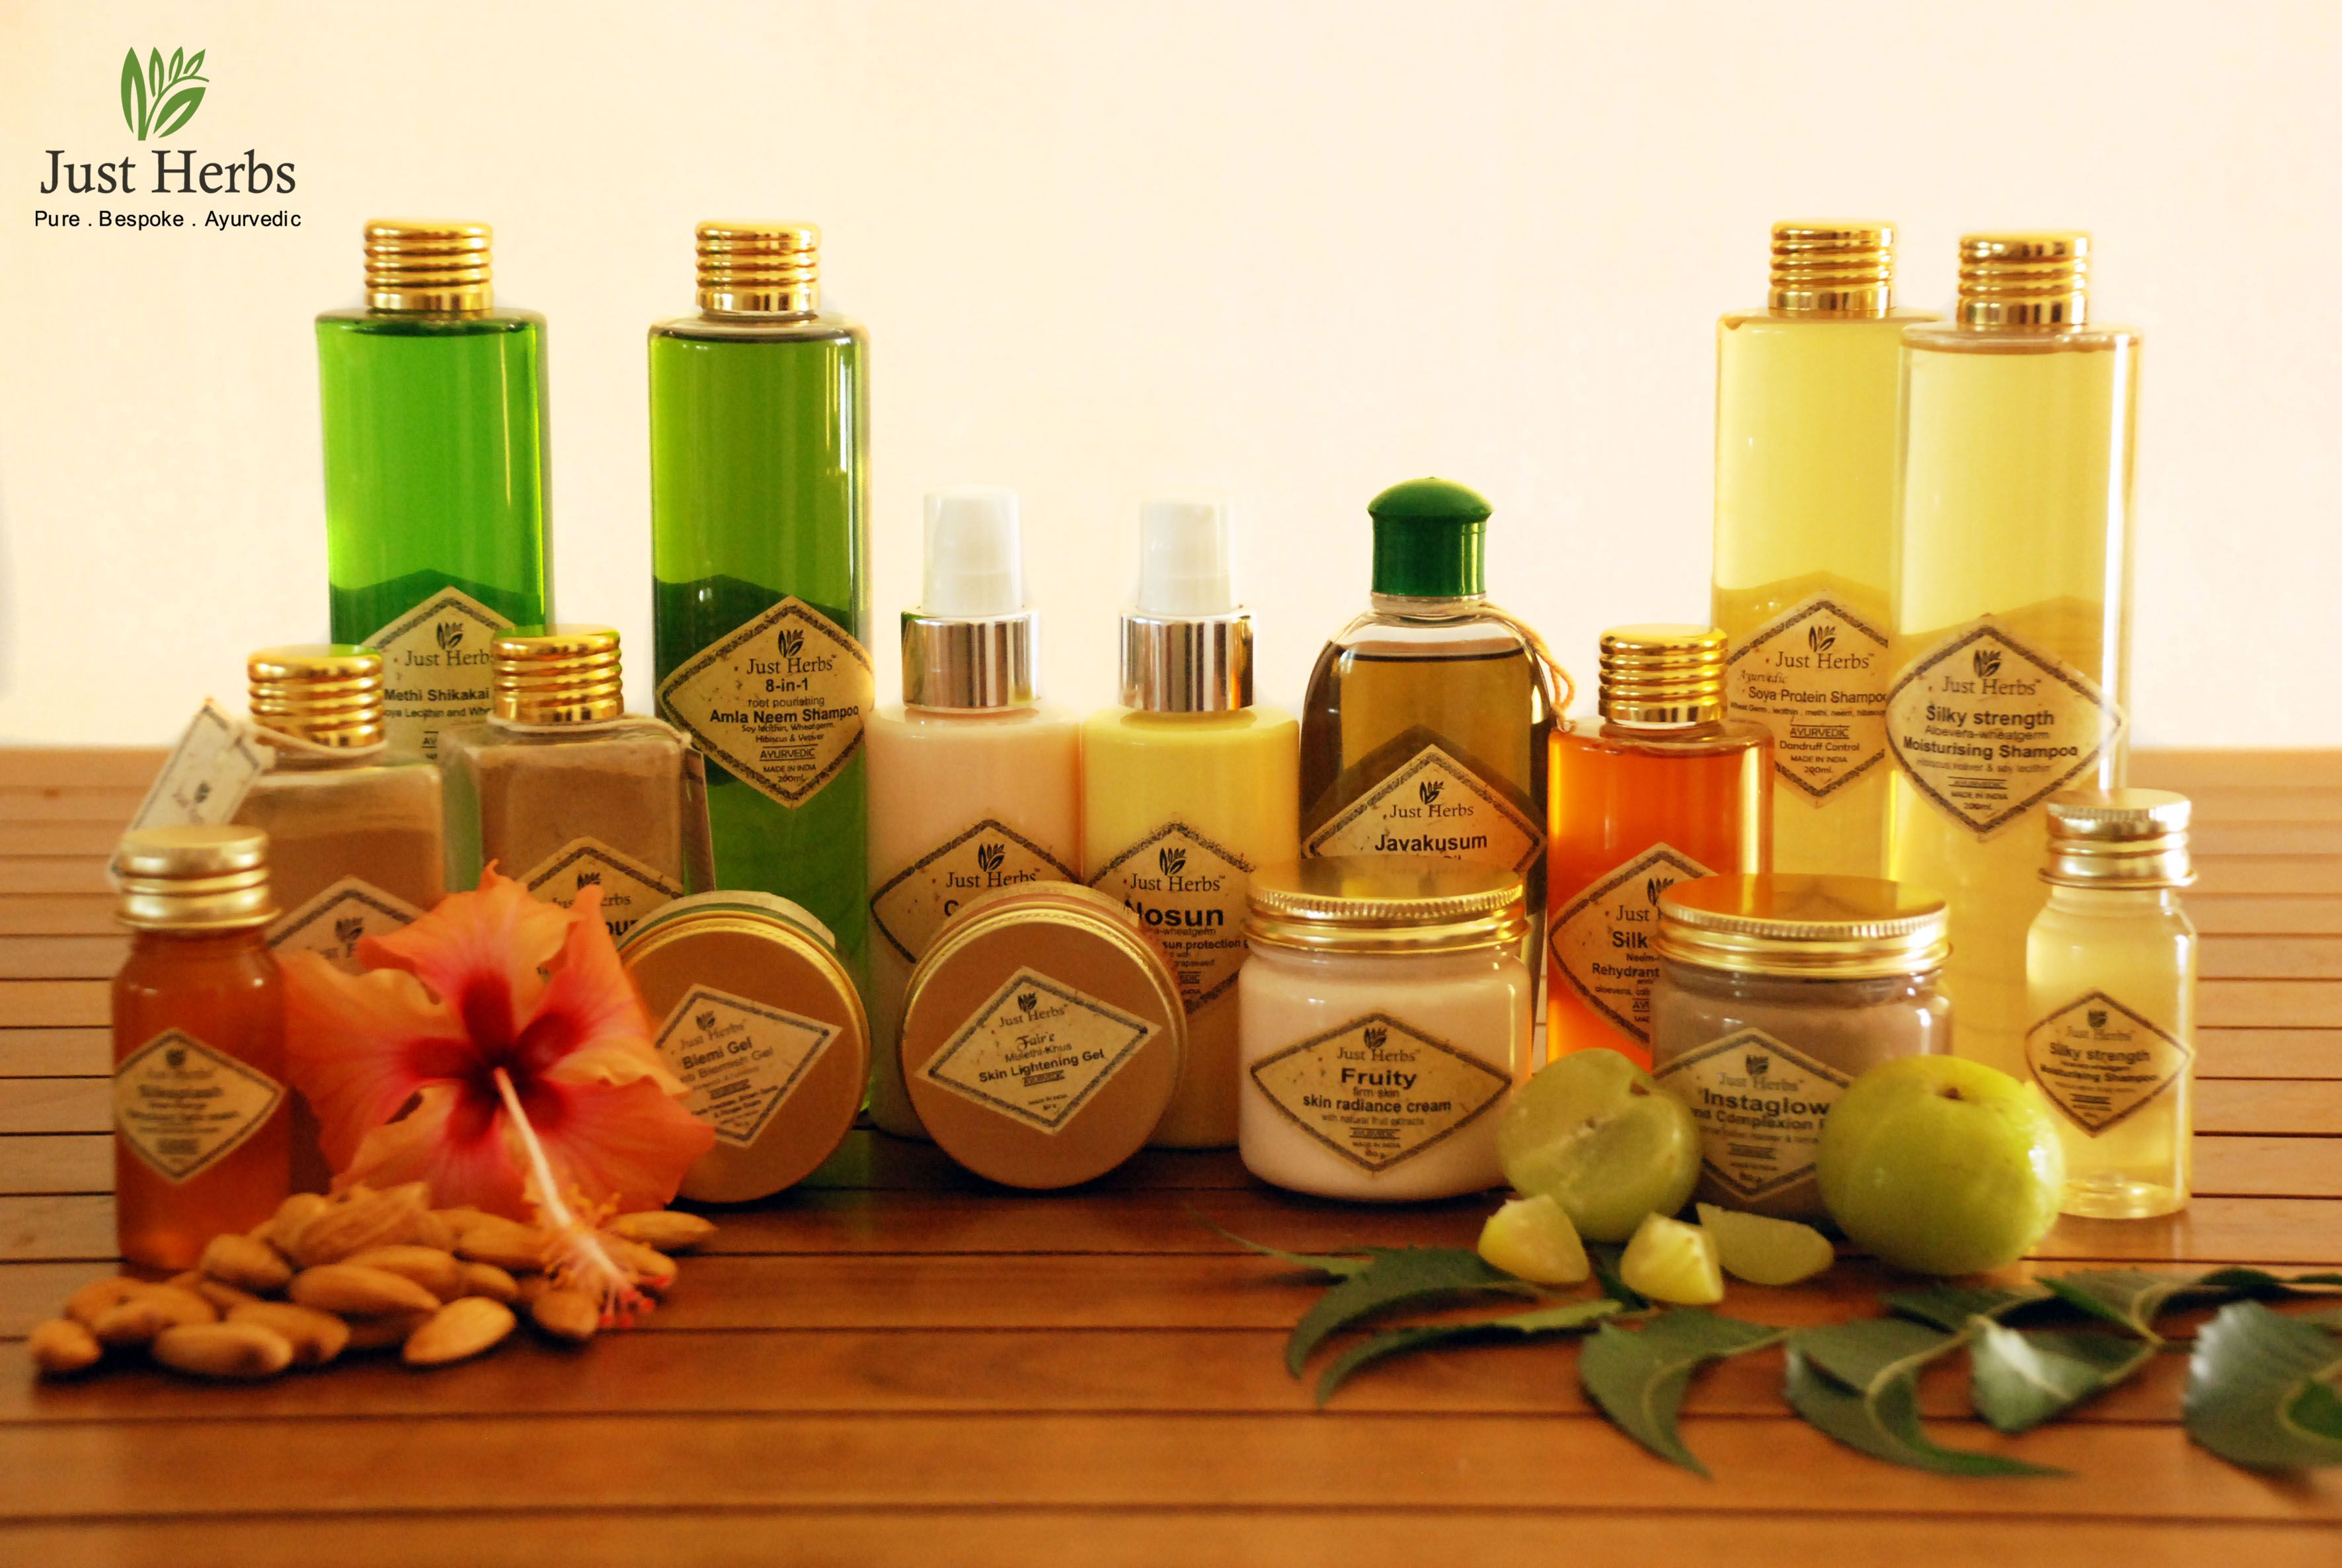 Just Herbs: Dr. Neena Chopra’s entrepreneurial endeavor with organic Ayurvedic beauty and spa products